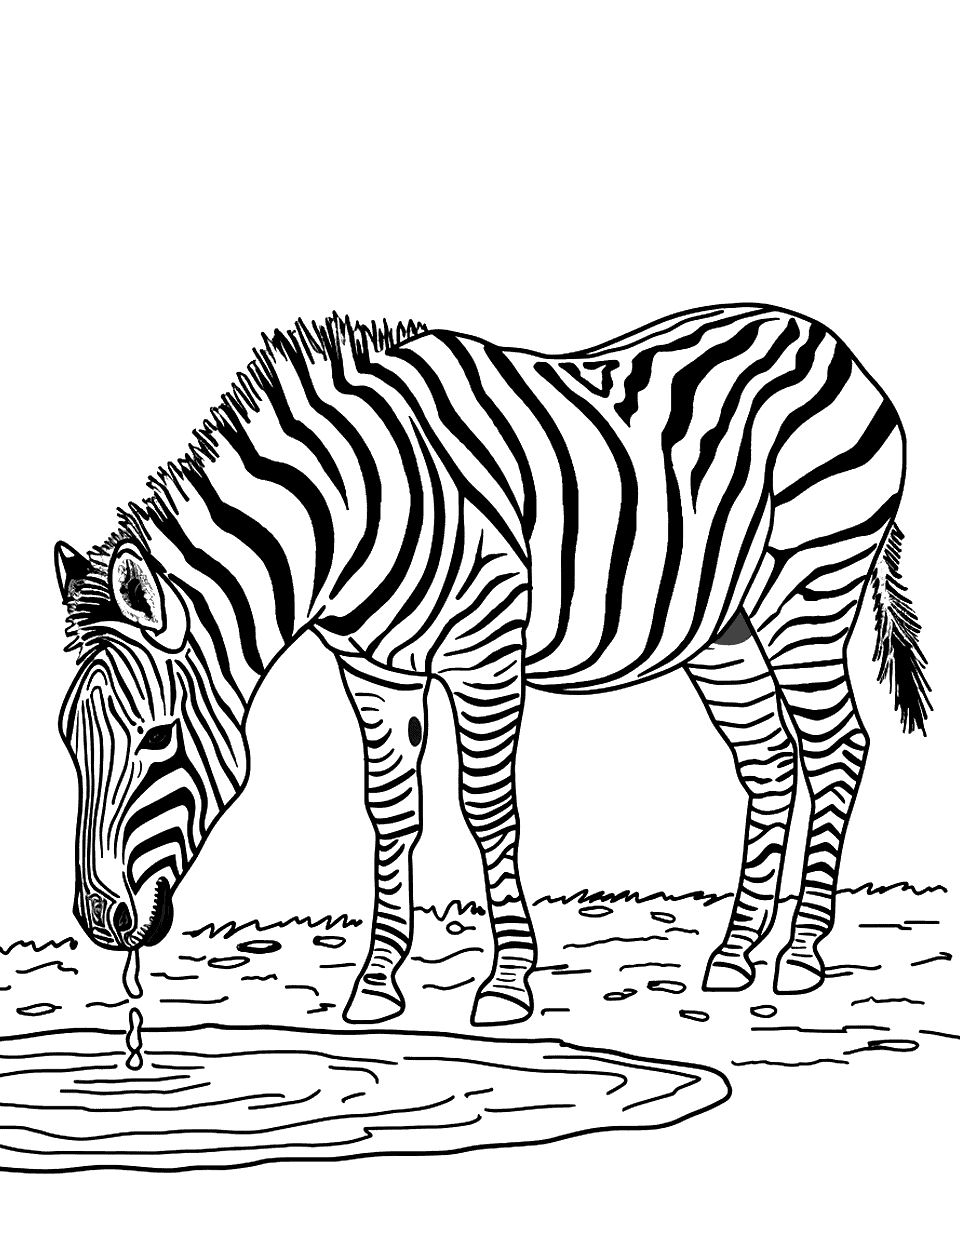 Zebra at the Waterhole Coloring Page - A single zebra drinking from a calm pond.